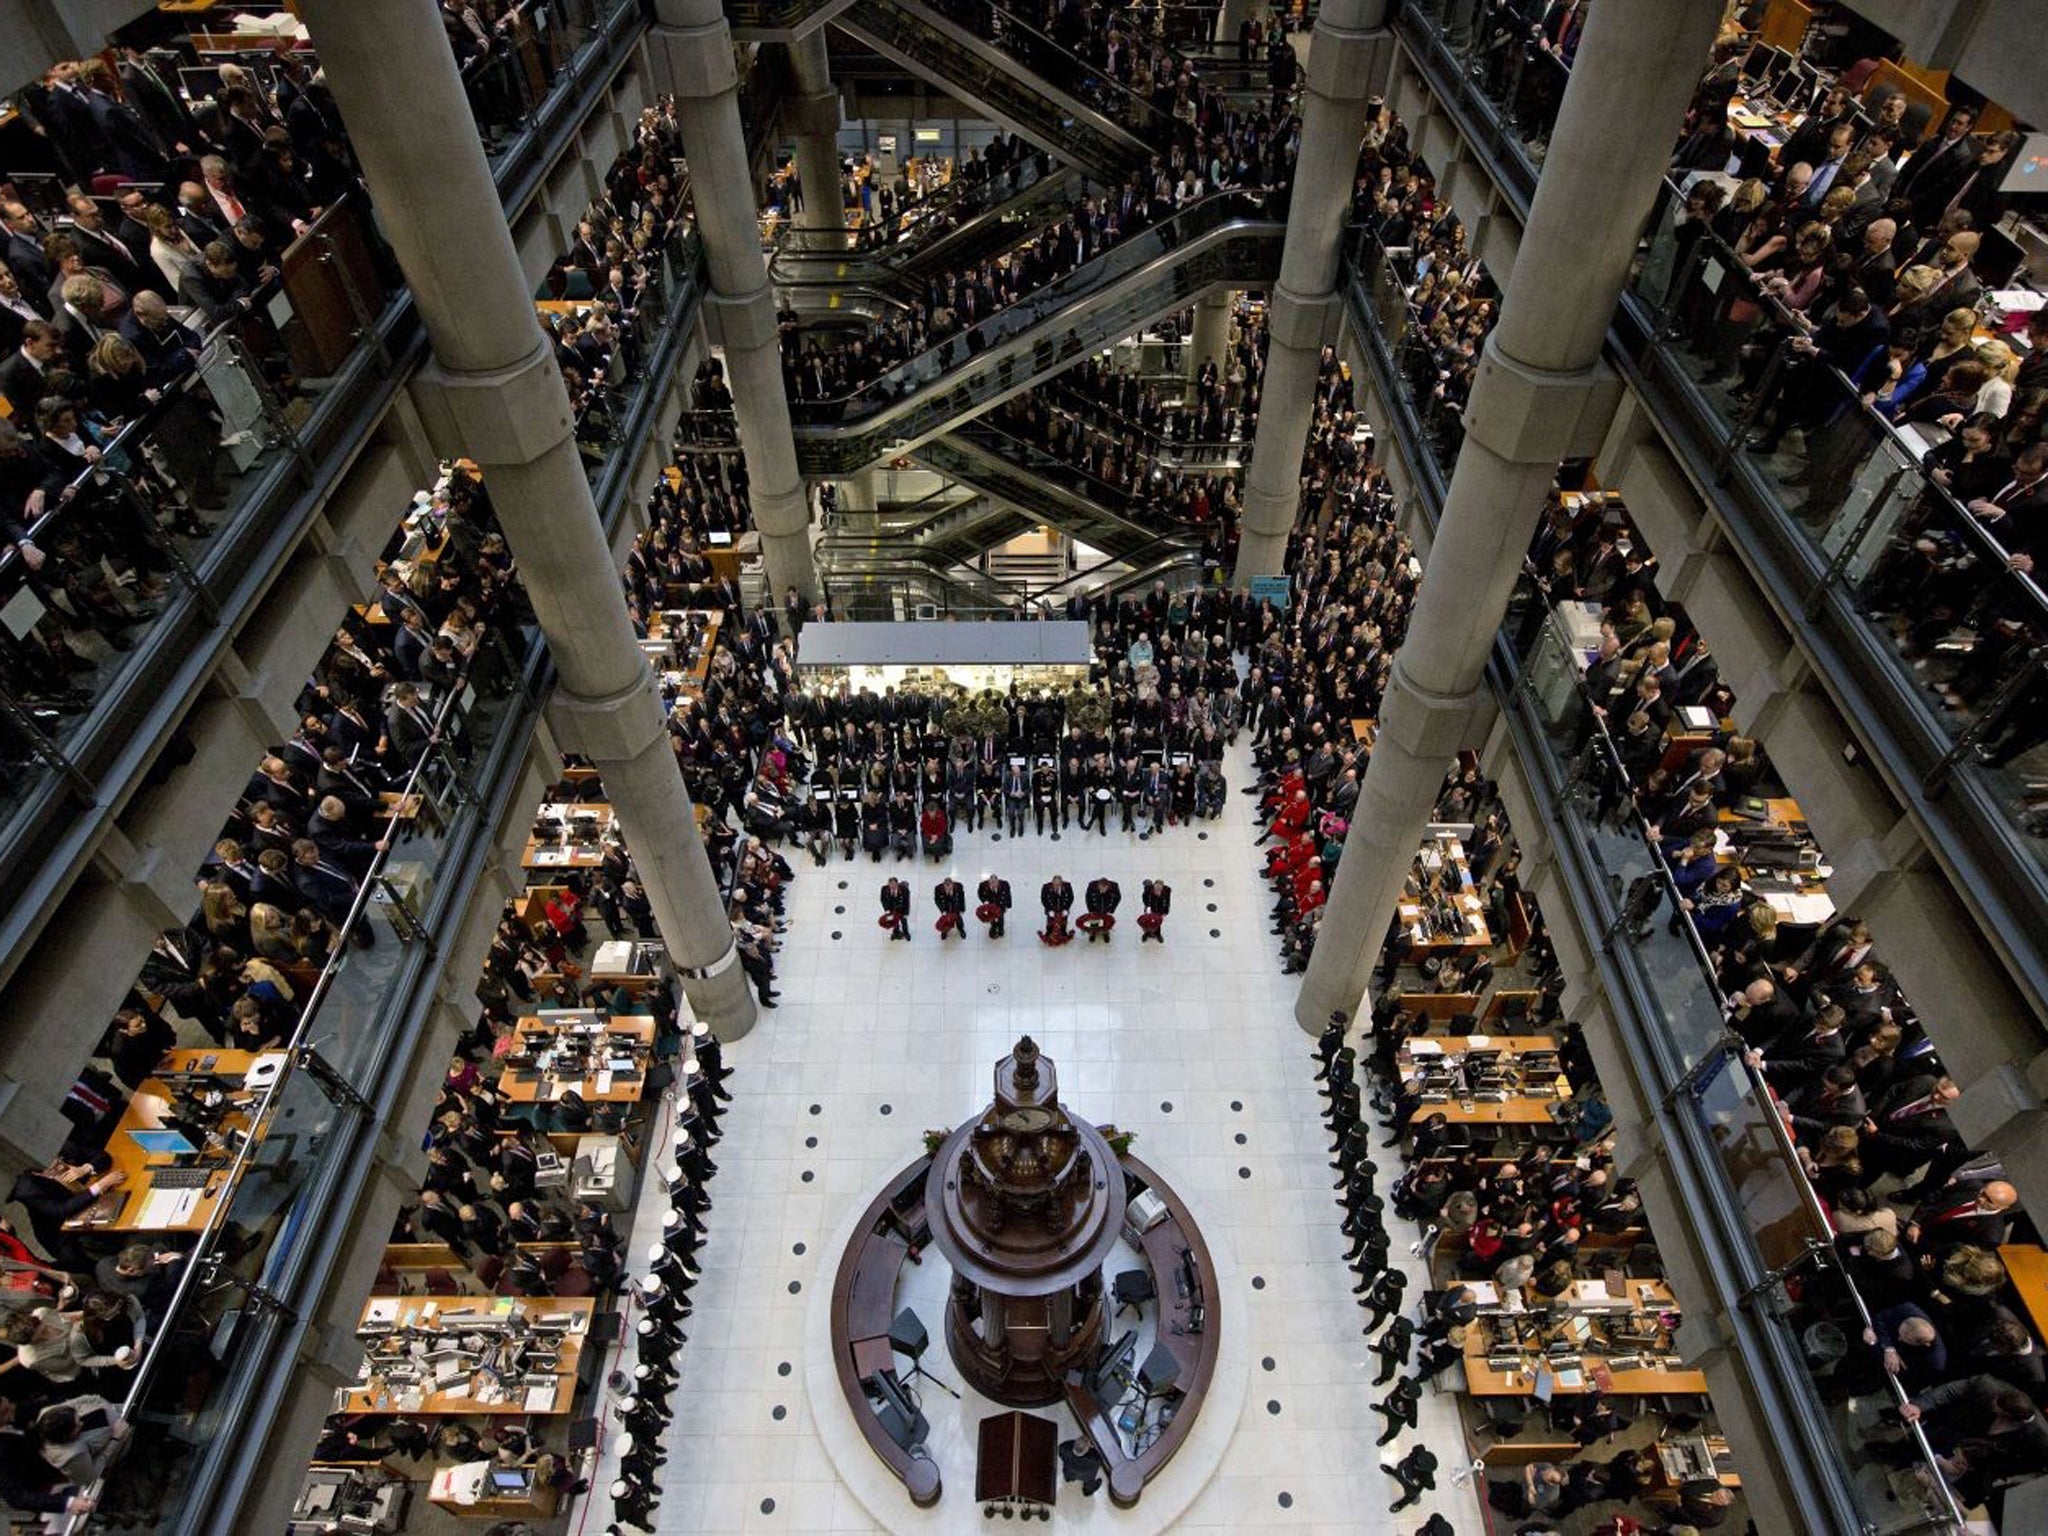 Brokers and underwriters line the balconies and escalators of the Lloyd's of London building in central London